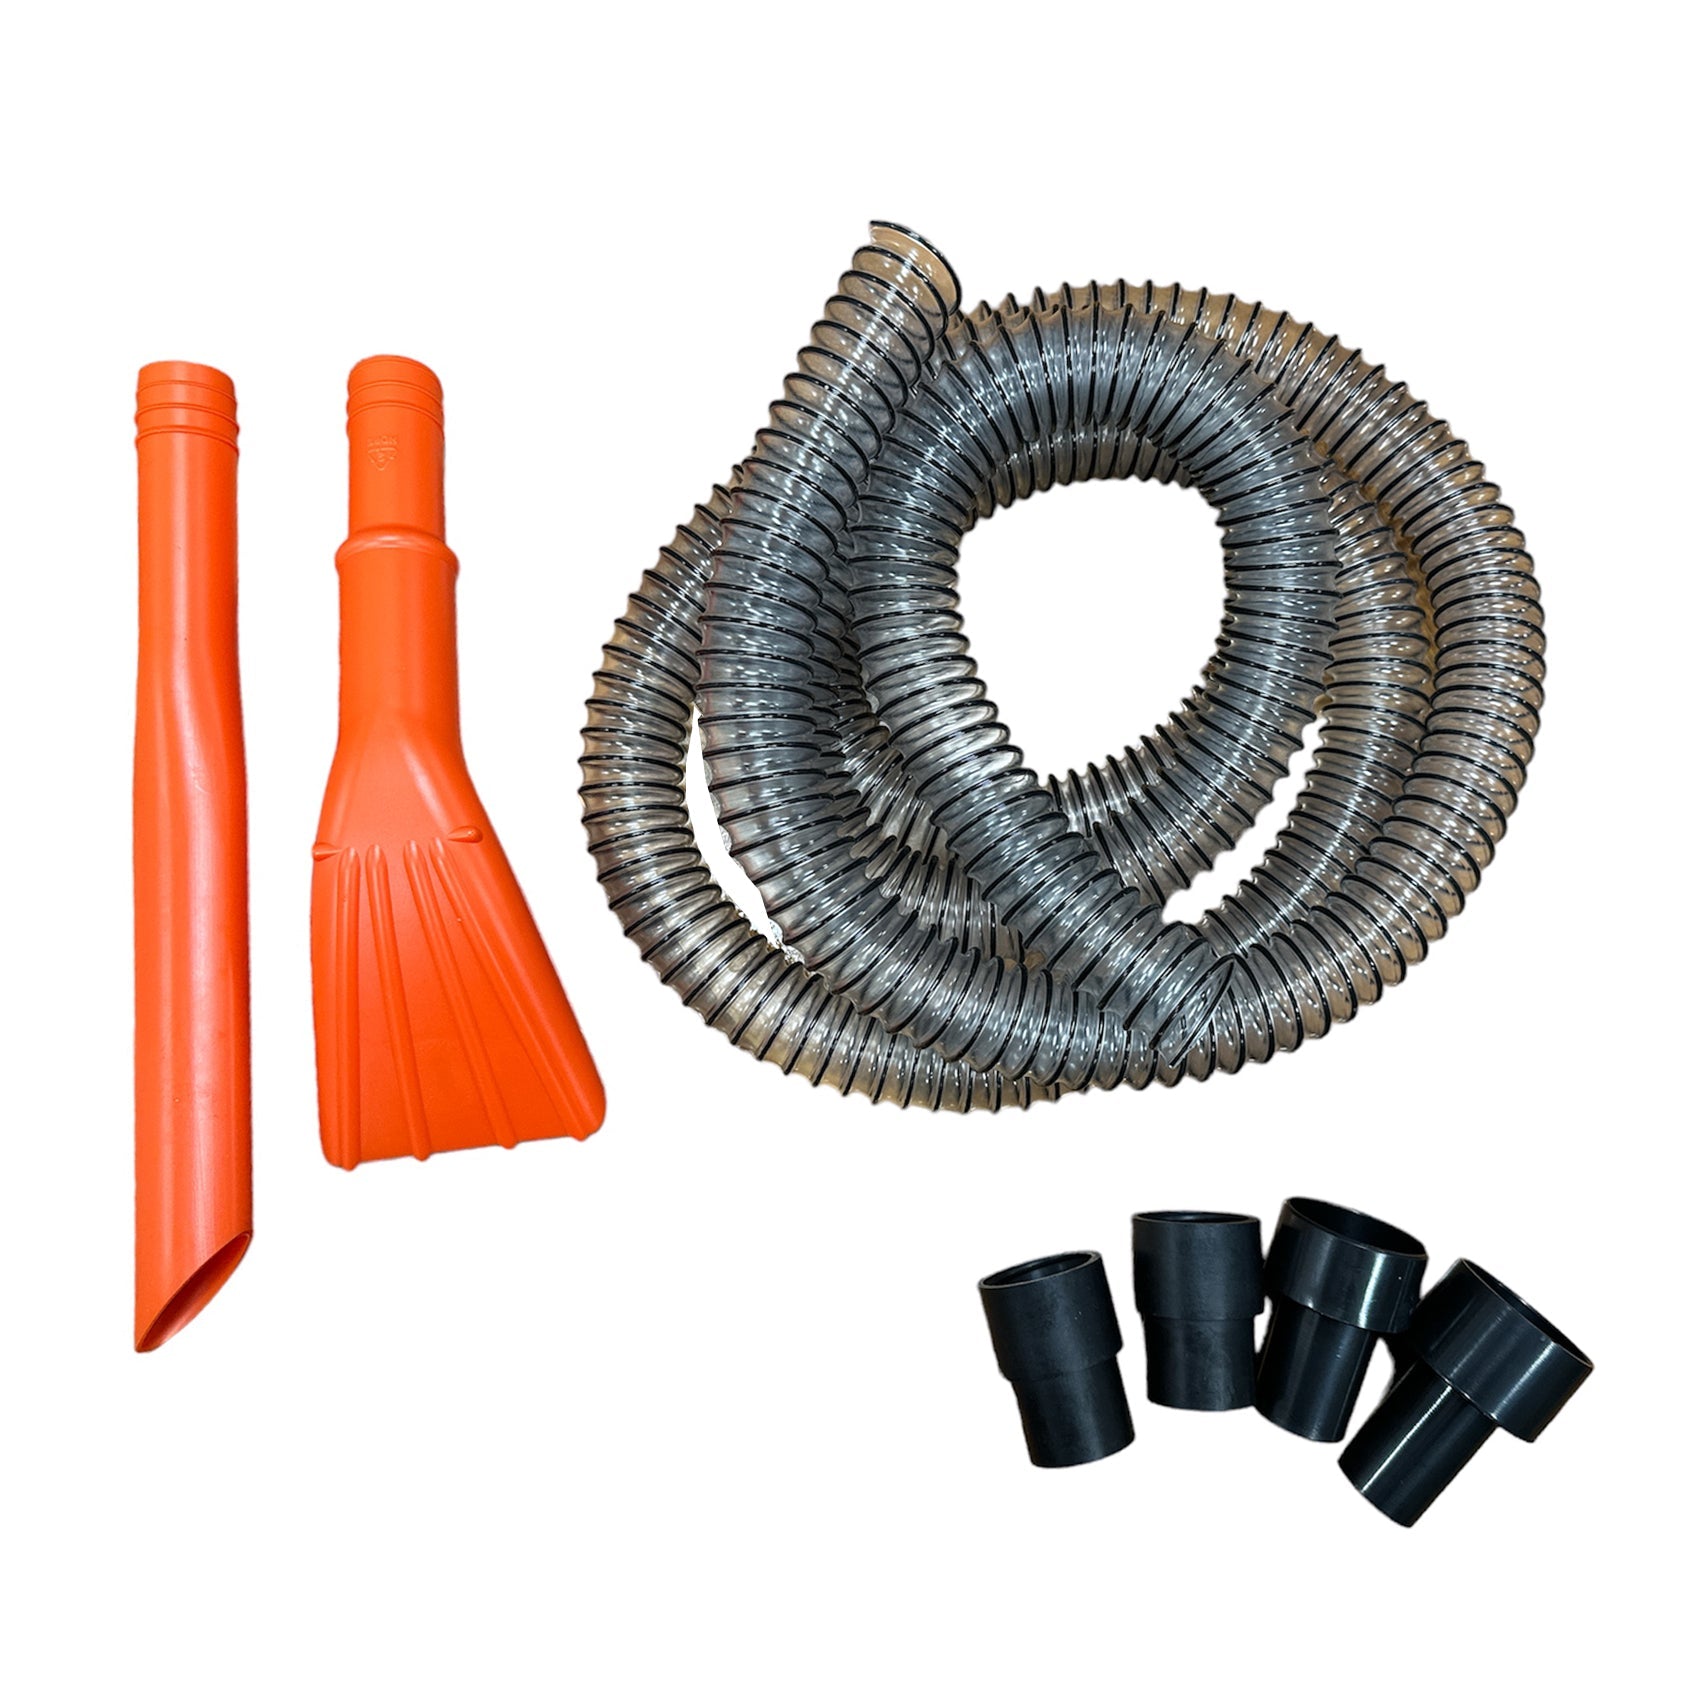 Dust Collection / Vacuum Hose & Accessory (2-1/2") Kit 7Pce Z-85 by Oltre